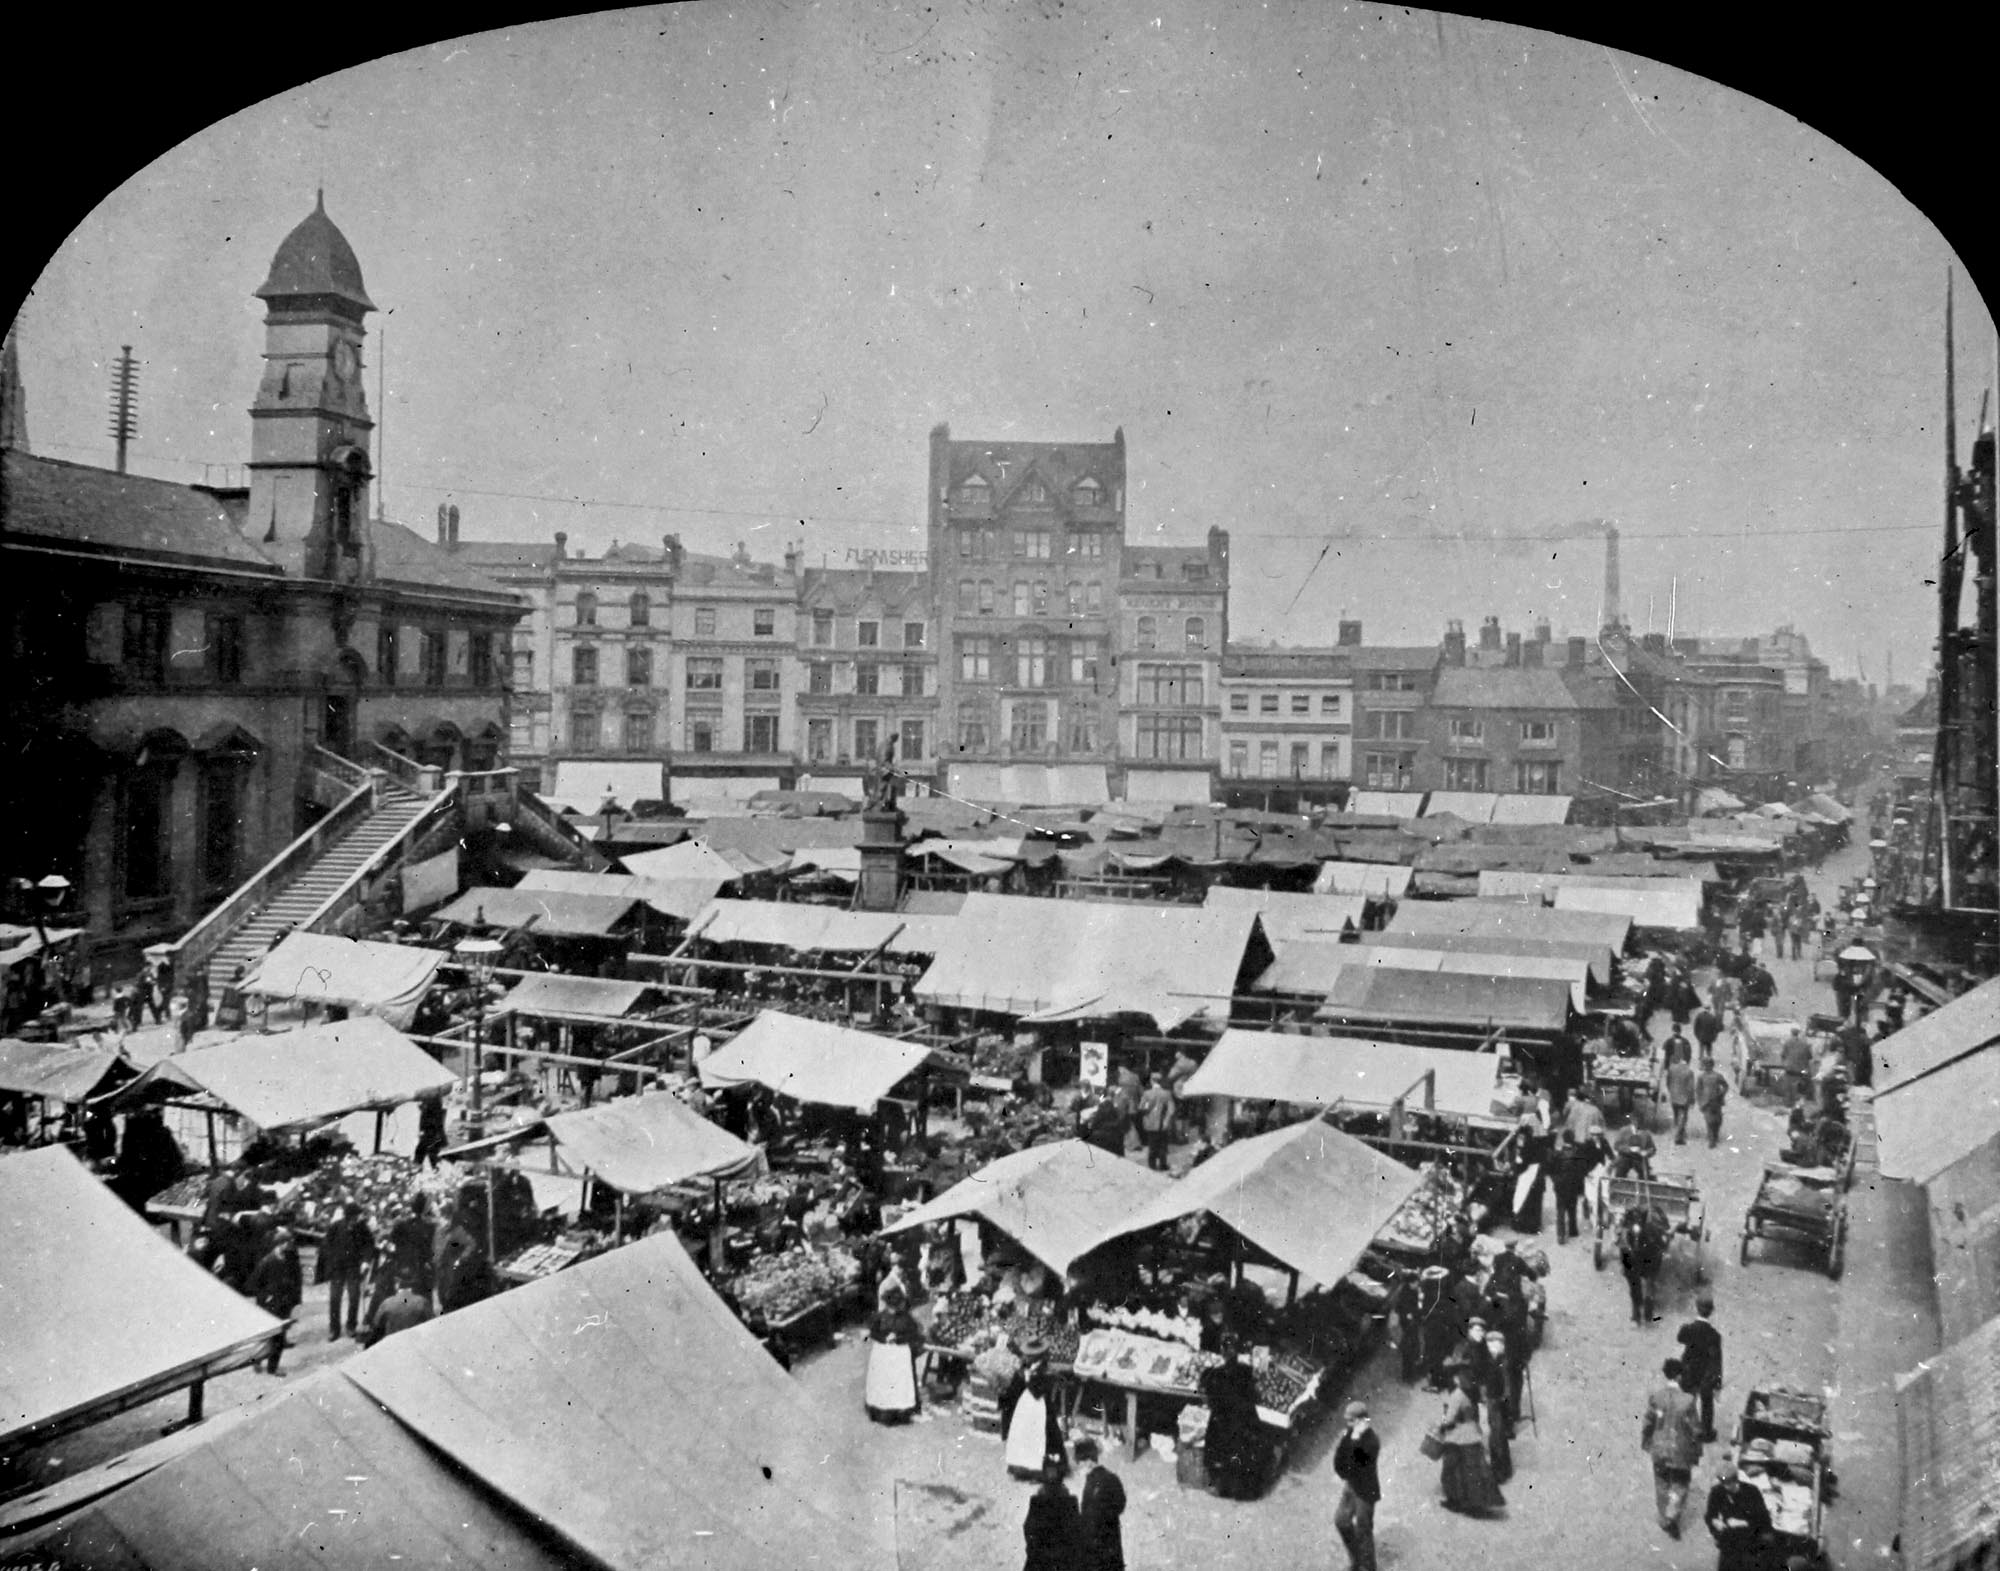 Looking across a busy day at Leicester Market, pre 1900 - Leicestershire Record Office